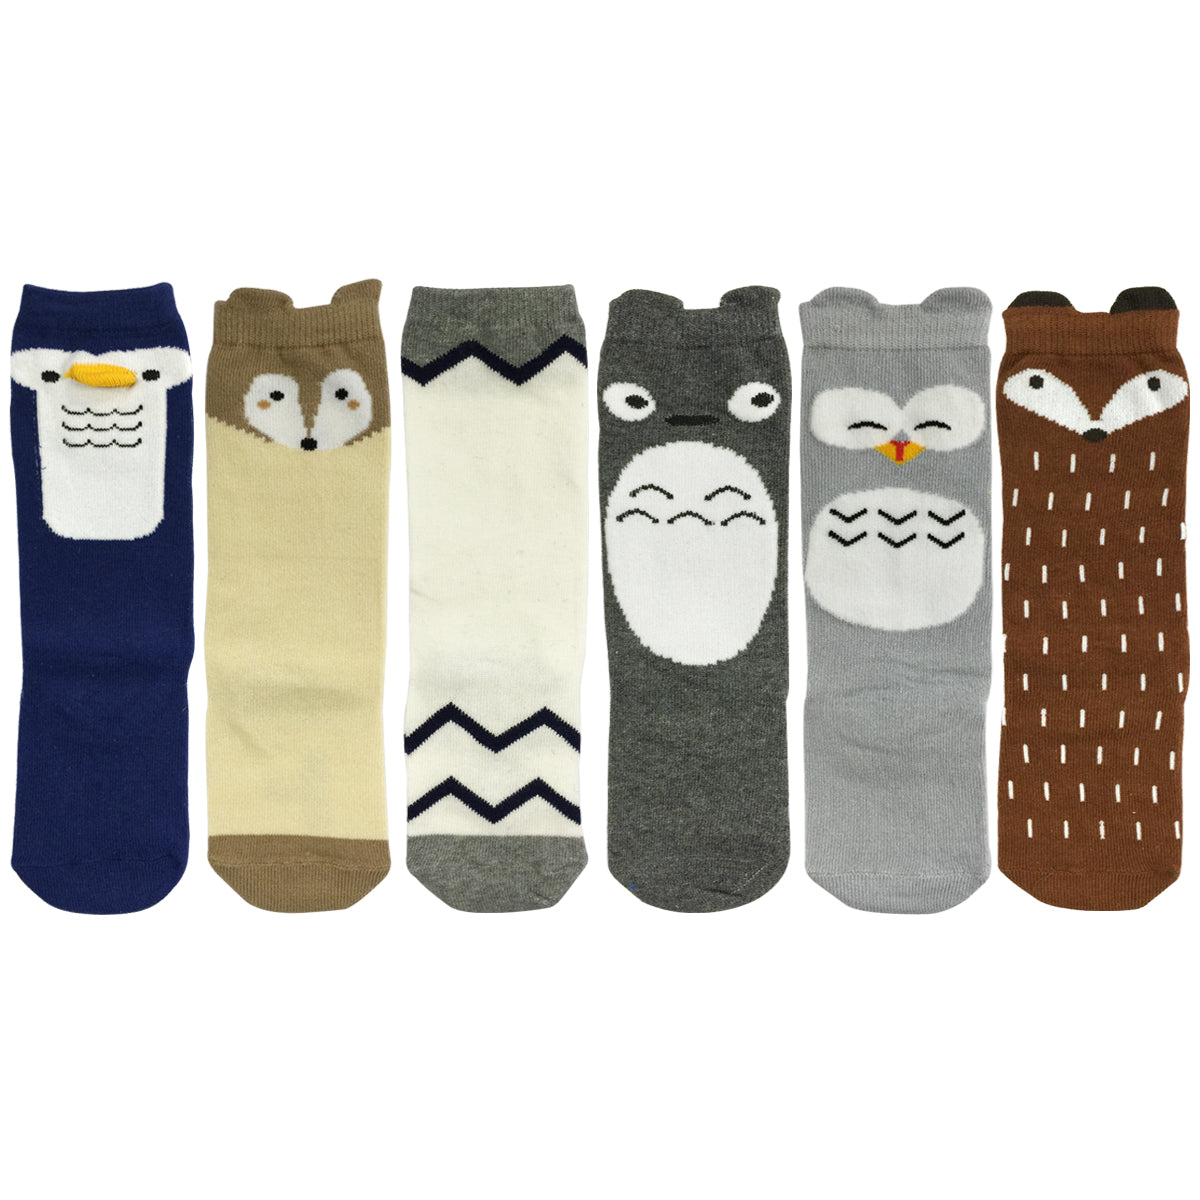 Wrapables My Best Buddy Socks for Baby (Set of 6), Arctic Buddies (4-6)